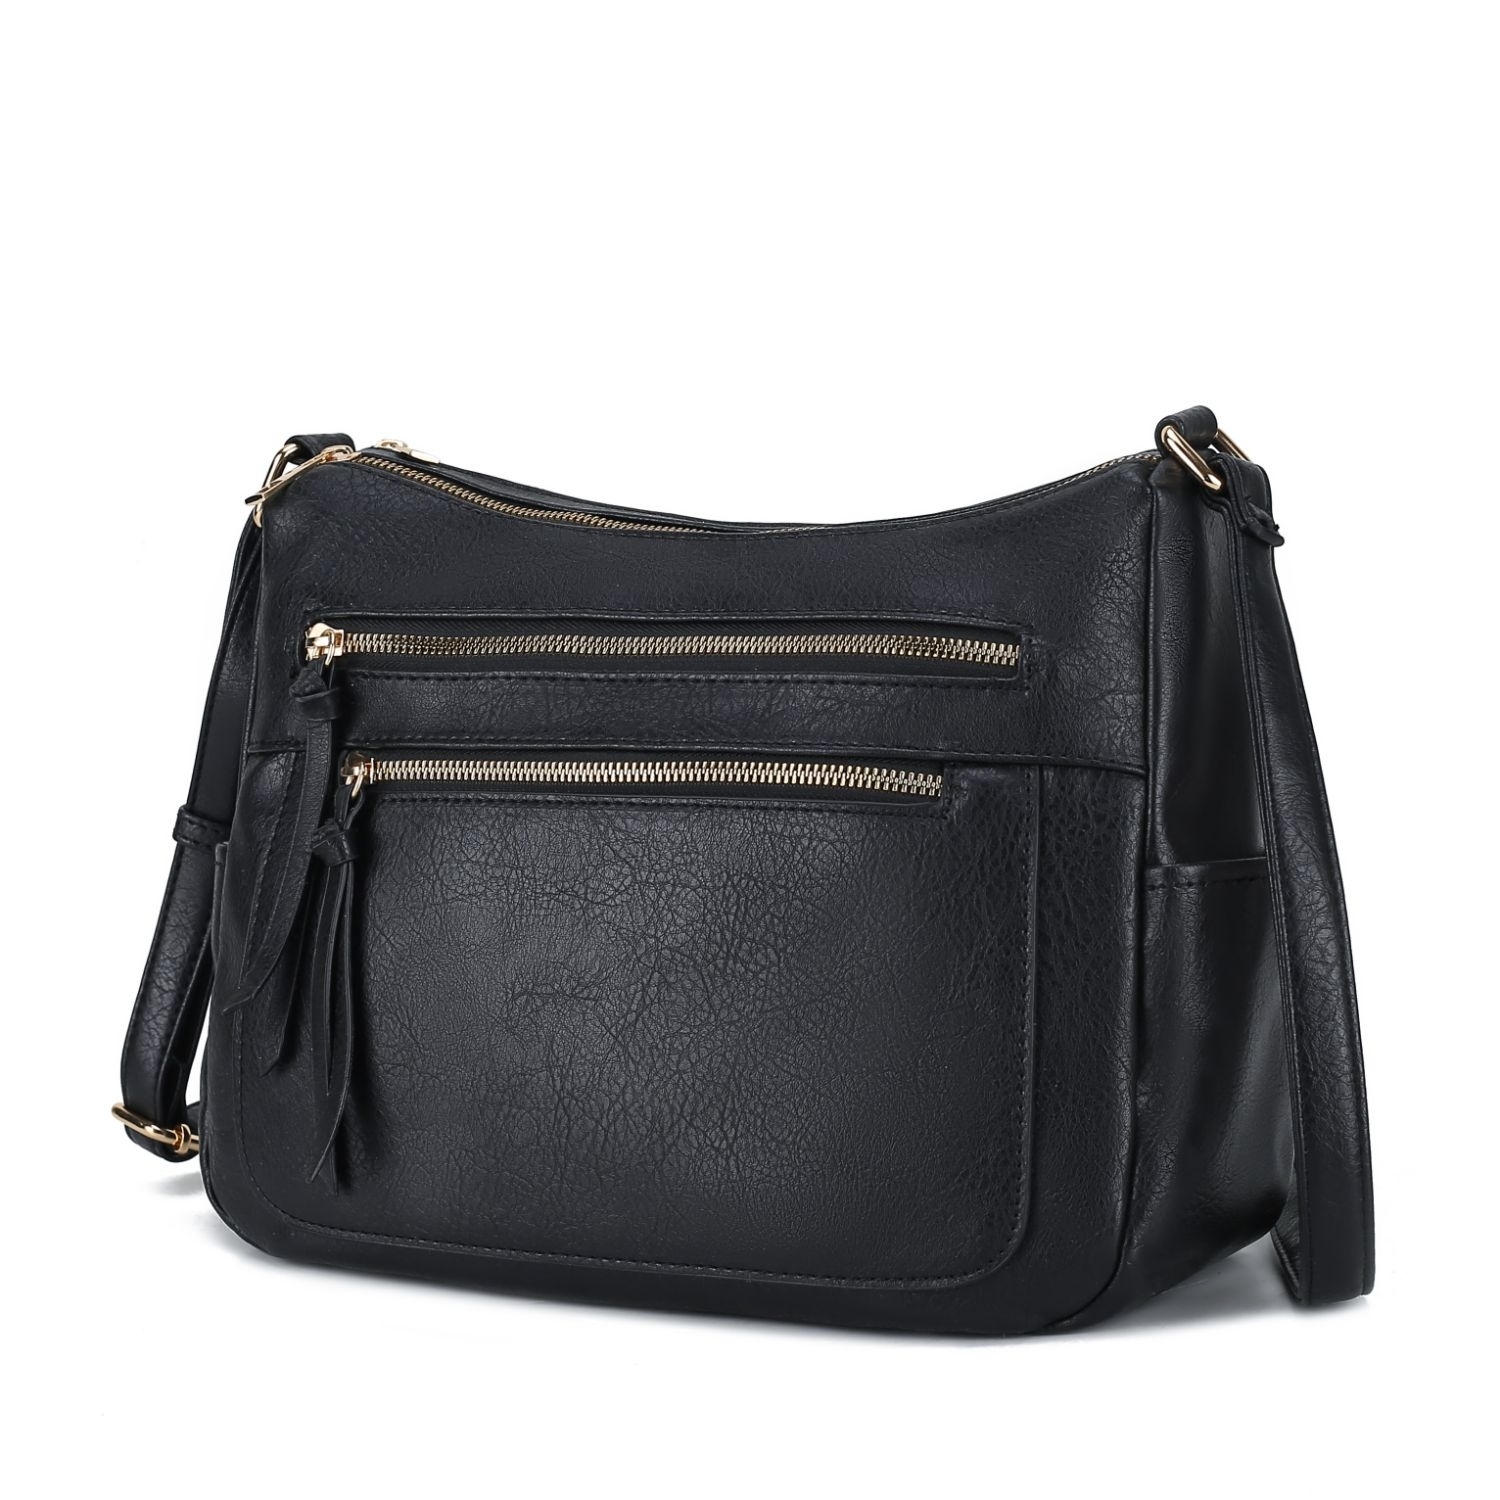 MKF Collection Zilla Vegan Leather Women's Shoulder Bag By Mia K - Tan